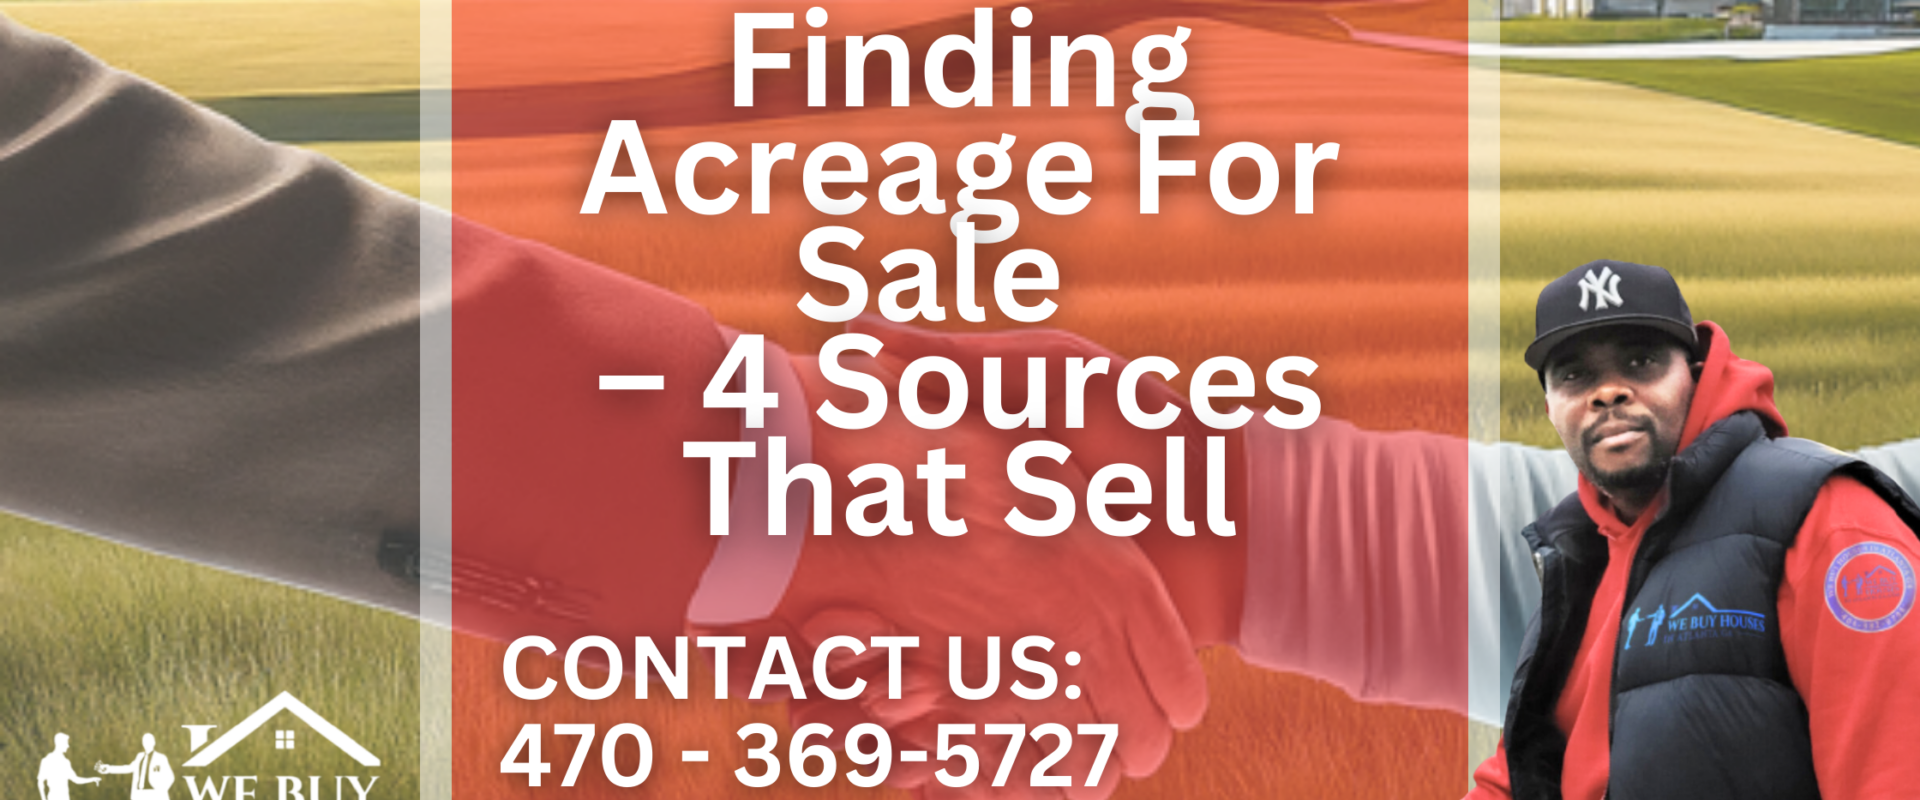 Finding Acreage For Sale – 4 Sources That Sell